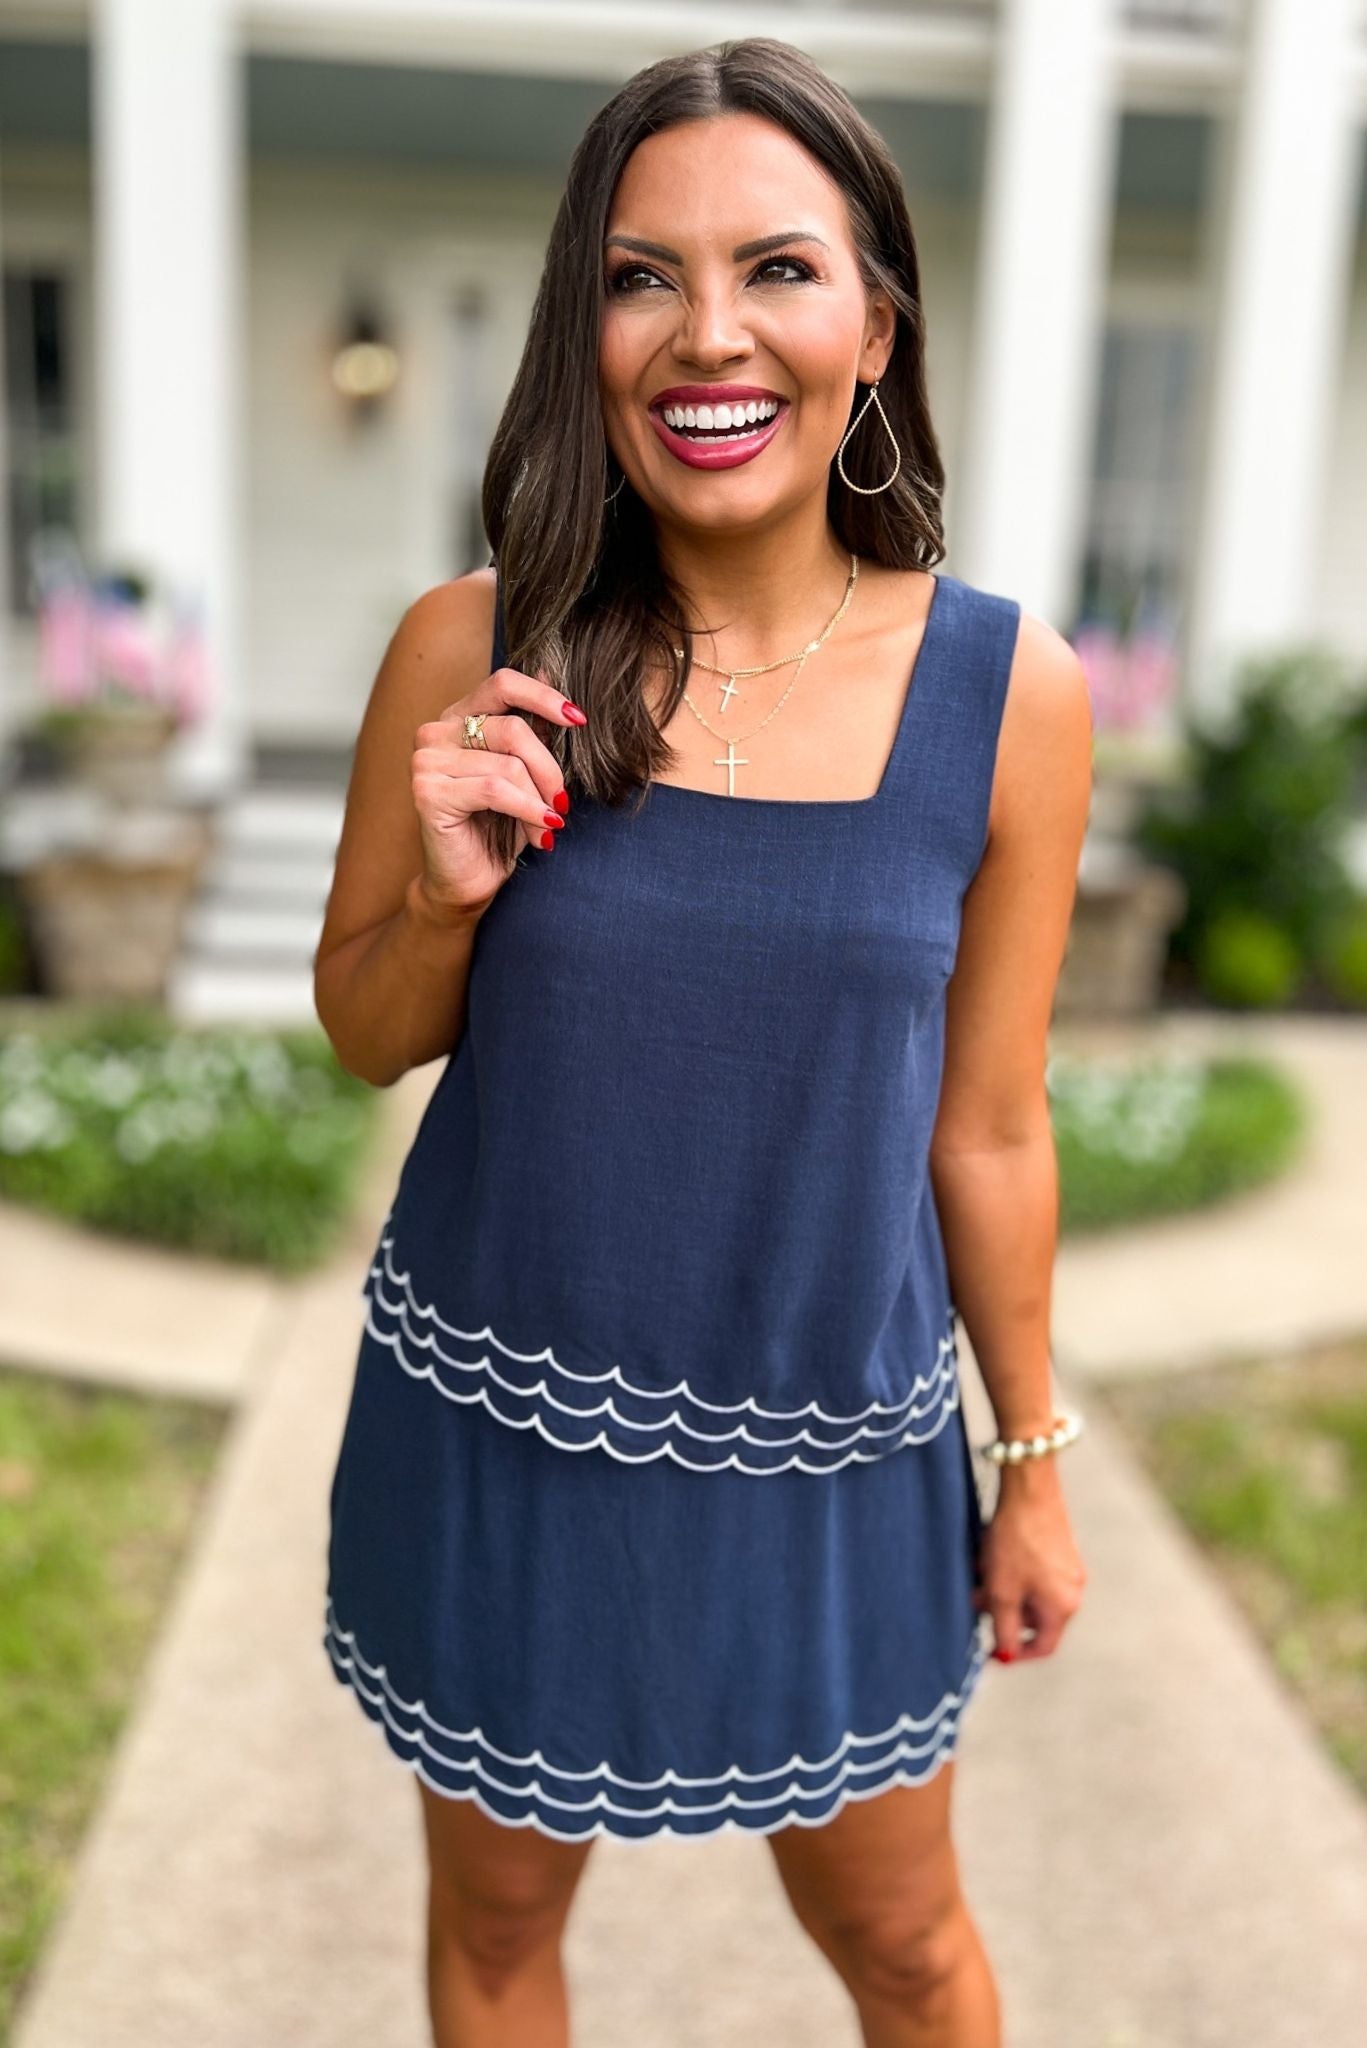  SSYS The Elaine Scallop Ric Rac Linen Skort Set In Navy, ssys set, ssys the label, elevated set, must have set, Fourth of July collection, must have style, mom style, summer style, shop style your senses by MALLORY FITZSIMMONS, ssys by MALLORY FITZSIMMONS